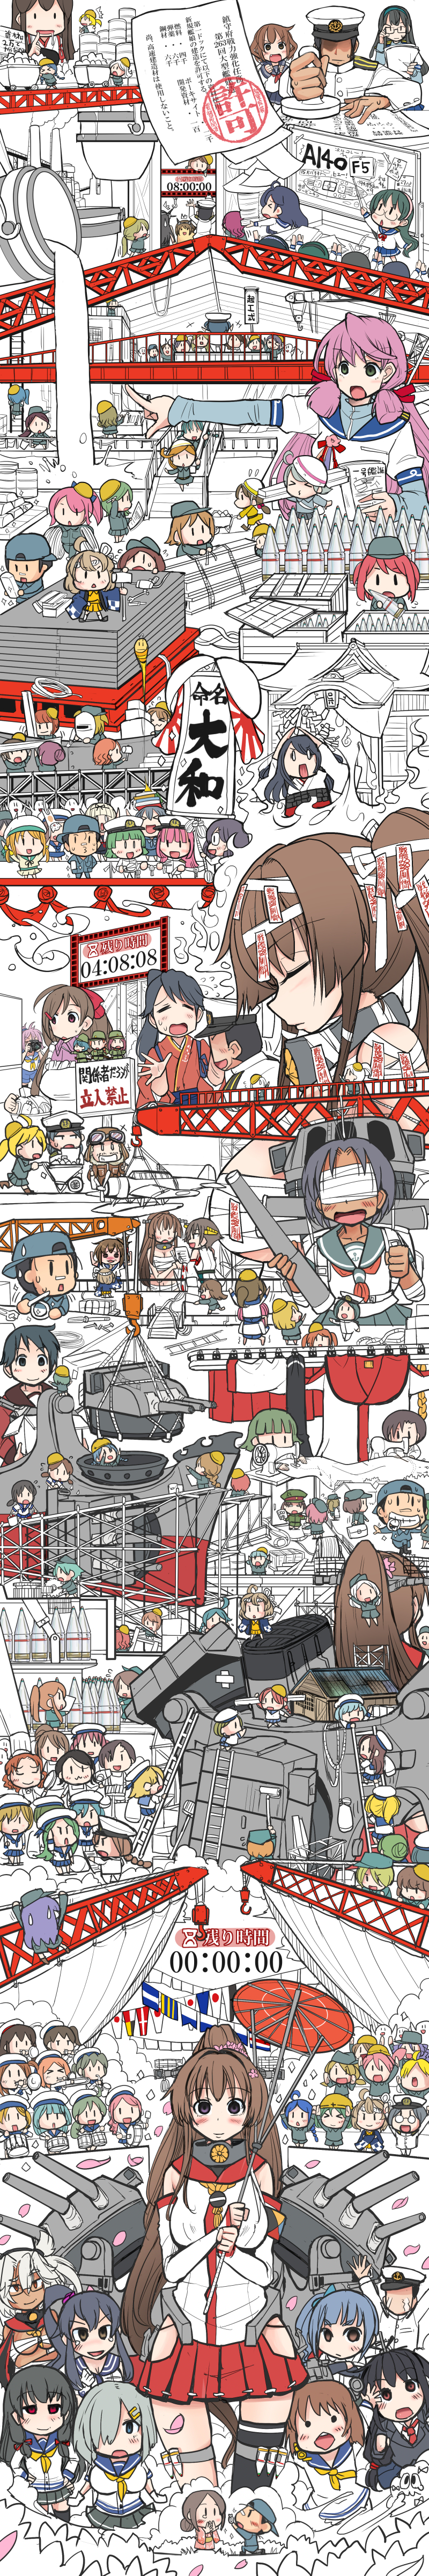 1boy 6+girls :&lt;&gt; absurdres adjusting_glasses admiral_(kantai_collection) ahoge akagi_(kantai_collection) akamatsu_sadaaki akashi_(kantai_collection) ammunition anger_vein aoba_(kantai_collection) apron arms_up asymmetrical_legwear aviator_cap aviator_glasses backpack bag band bandages_over_eyes bangs bare_shoulders baseball_cap batsubyou black_hair blindfold blue_hair blunt_bangs bow brown_eyes brown_hair bucket budget_sarashi camera carrying_over_shoulder carrying_under_arm celebration chef_hat cherry_blossoms clenched_hands colored construction covering_mouth crane crate crossed_arms damage_control_crew_(kantai_collection) damage_control_goddess_(kantai_collection) detached_sleeves diagram drooling drum drum_(container) error_musume faceless faceless_male failure_penguin fairy_(kantai_collection) fang finger_to_mouth flat_cap flower fusou_(kantai_collection) gameplay_mechanics girl_holding_a_cat_(kantai_collection) glasses goggles goggles_on_head green_hair hair_bow hair_flower hair_ornament hair_ribbon hairband hairclip hamakaze_(kantai_collection) harbor hardhat hat hatsushimo_(kantai_collection) headgear helmet helmet_musume_(kantai_collection) hiei_(kantai_collection) high_ponytail highres houshou_(kantai_collection) ikazuchi_(kantai_collection) instrument isokaze_(kantai_collection) japanese_clothes kantai_collection kasumi_(kantai_collection) ladder long_hair long_image long_ponytail long_sleeves machinery maintenance_musume_(kantai_collection) mallet mamiya_(kantai_collection) military military_hat military_uniform mine_cart miniboy minigirl mogami_(kantai_collection) mouth_hold multiple_girls musashi_(kantai_collection) musical_instrument mutsu_(kantai_collection) mutsu_(snail) nagato_(kantai_collection) naval_uniform neckerchief nontraditional_miko ofuda ooyodo_(kantai_collection) oriental_umbrella paint_roller payot peaked_cap pink_hair pleated_skirt pointer pointing ponytail railroad_tracks ribbon sailor_collar sailor_dress sakazaki_freddy salute sarashi saxophone school_uniform screwdriver seaplane serafuku sewing sewing_machine short_hair shrine side_ponytail signal_flag silver_hair skirt sneaking stamp steel_ingot tall_image teamwork tears thigh_strap trombone trumpet turret twintails umbrella uniform violet_eyes welding_mask wheelbarrow wrench yahagi_(kantai_collection) yamato_(kantai_collection) yukikaze_(kantai_collection) yuudachi_(kantai_collection)